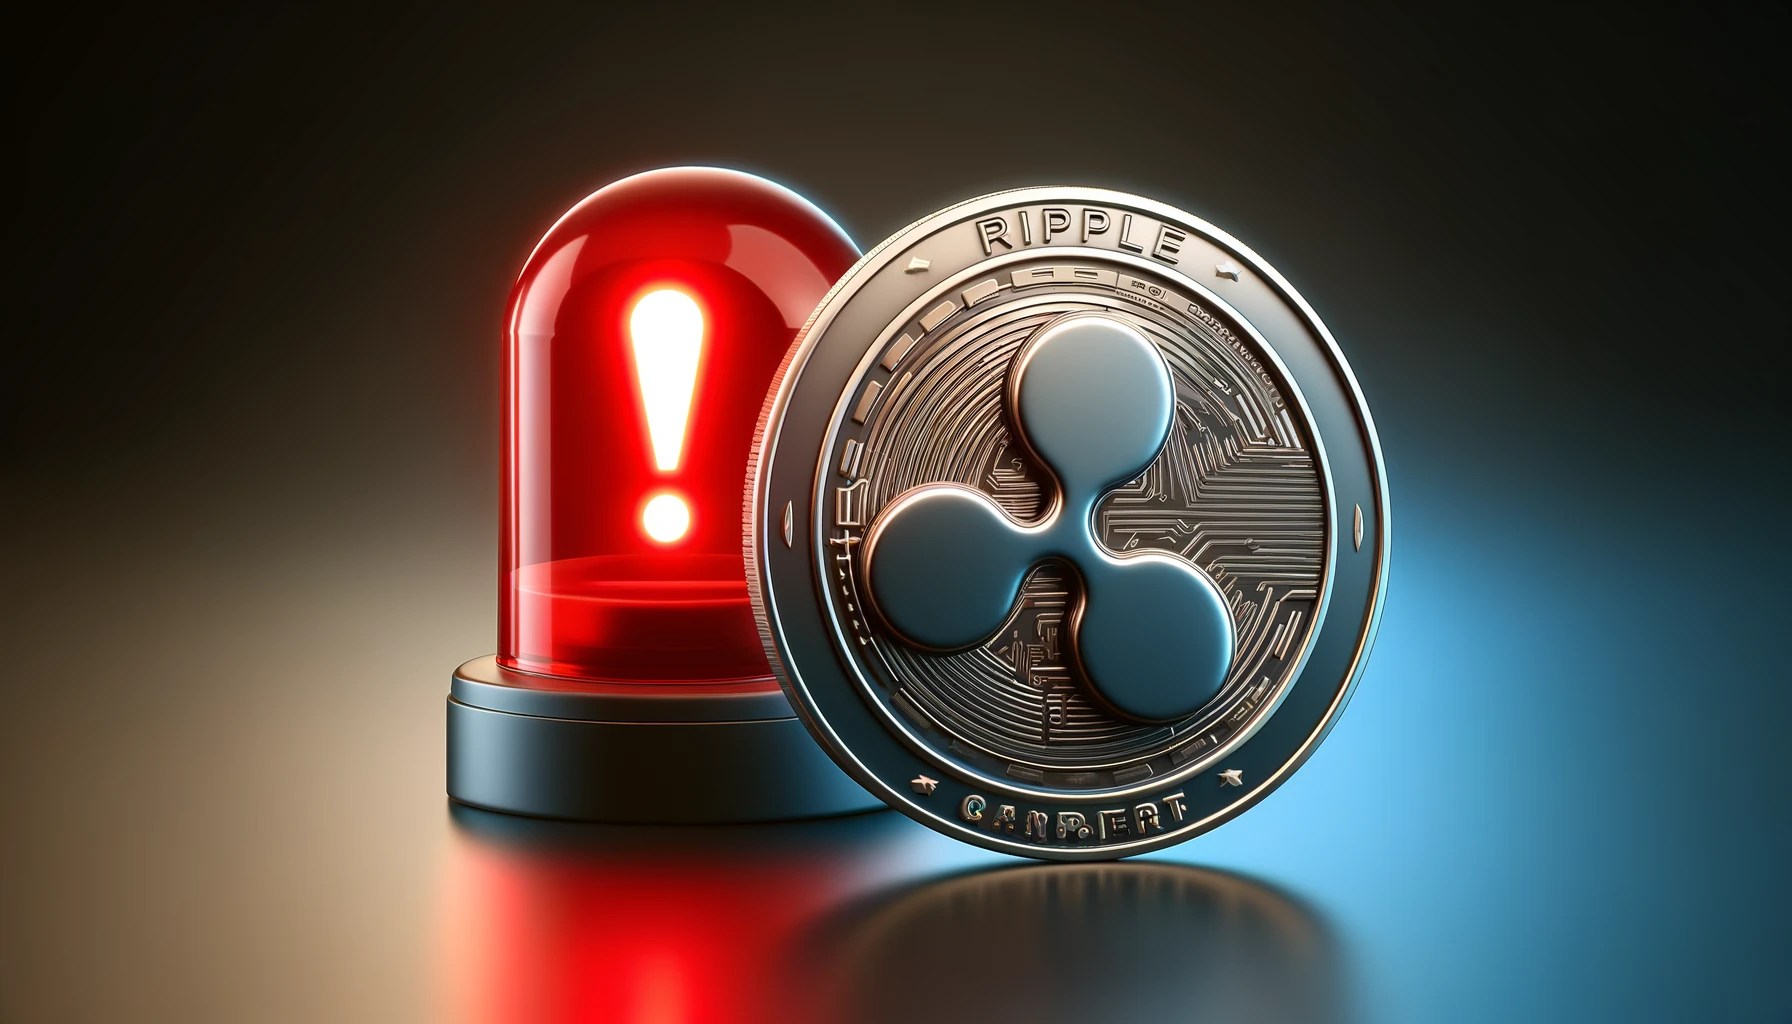 Scammers have begun to exploit the hype around Ripple’s anticipated stablecoin launch, circulating a counterfeit Ripple USD (RLUSD) token on the XRP Ledger (XRPL). The fraudulent activity comes ahead of the expected release of the official RLUSD, set to compete with heavyweight contenders such as Tether and Circle in the stablecoin market. Ripple President Monica […]